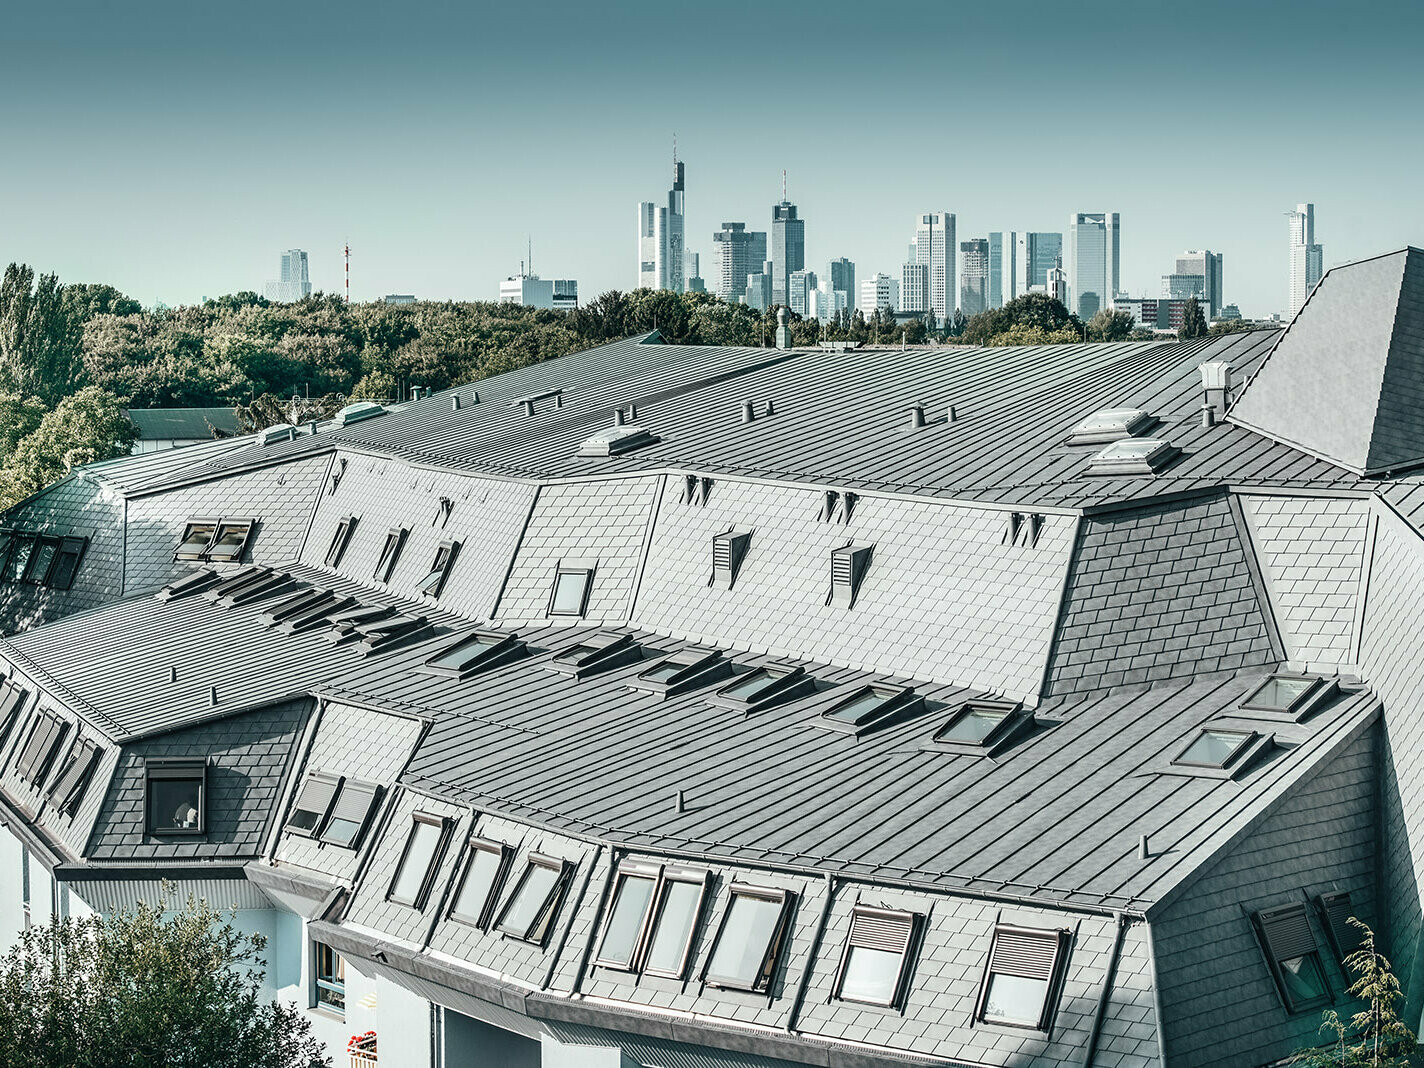 renovated roof landscape, side view of house with the Frankfurt skyline in the background, aluminium roof made of Prefalz and PREFA shingles, around 200 roof windows